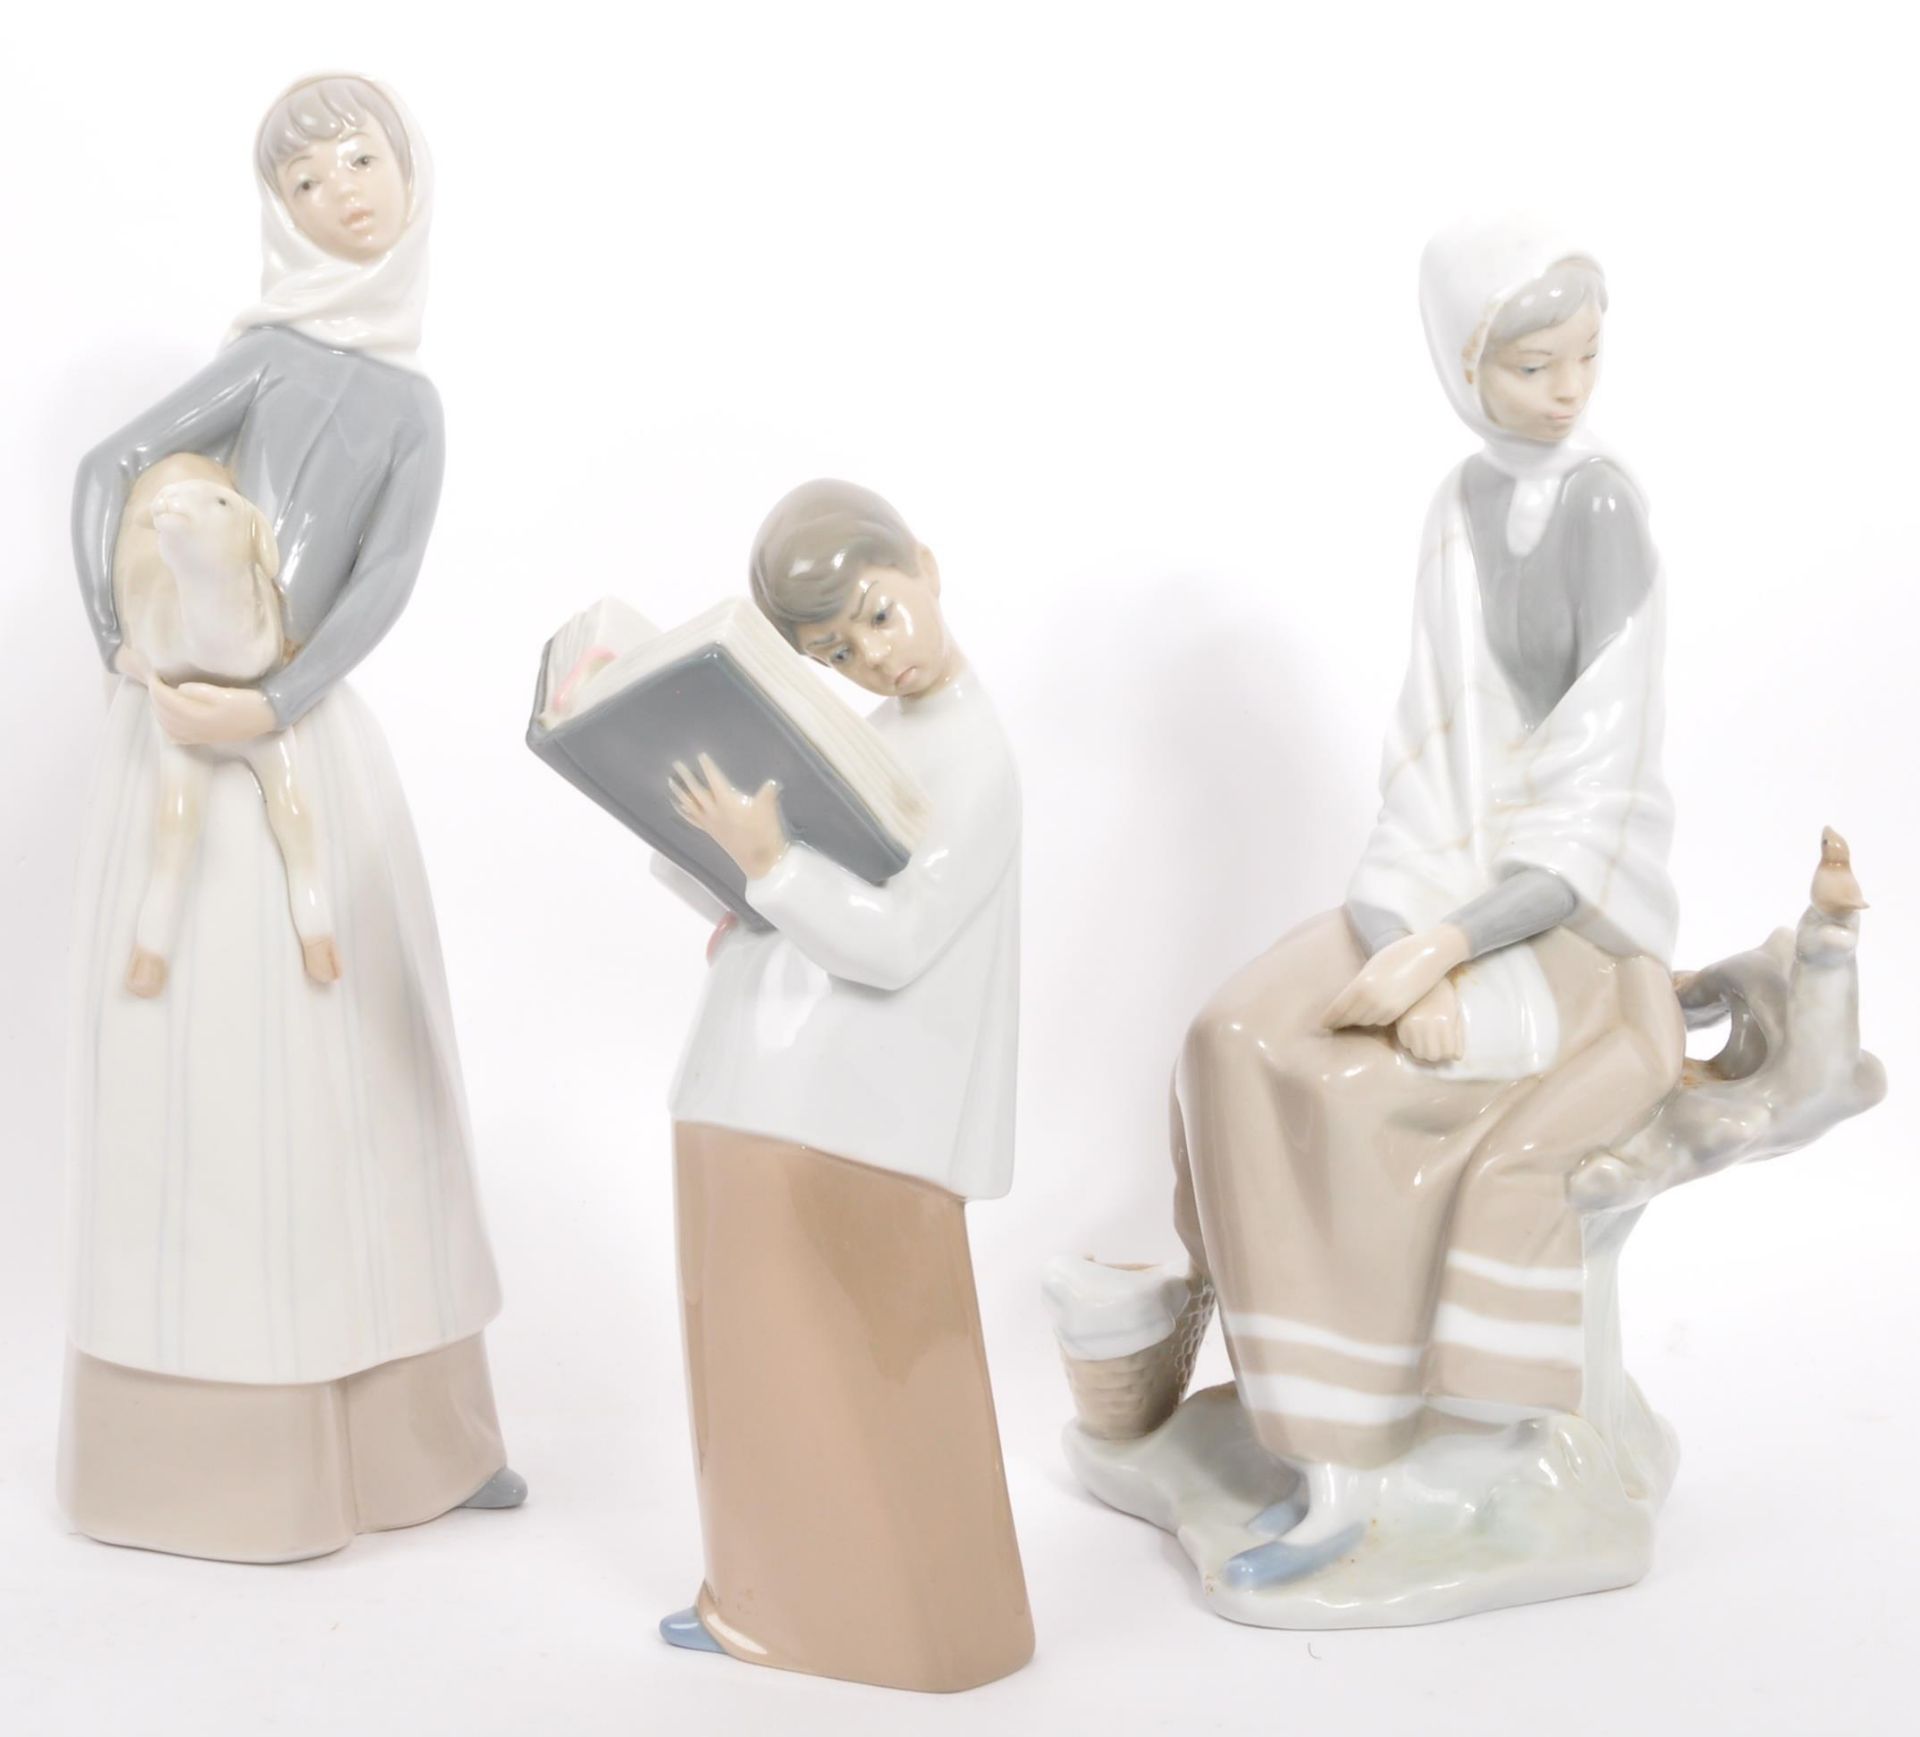 COLLECTION OF SIX VINTAGE NAO BY LLADRO PORCELAIN FIGURINES - Image 2 of 7